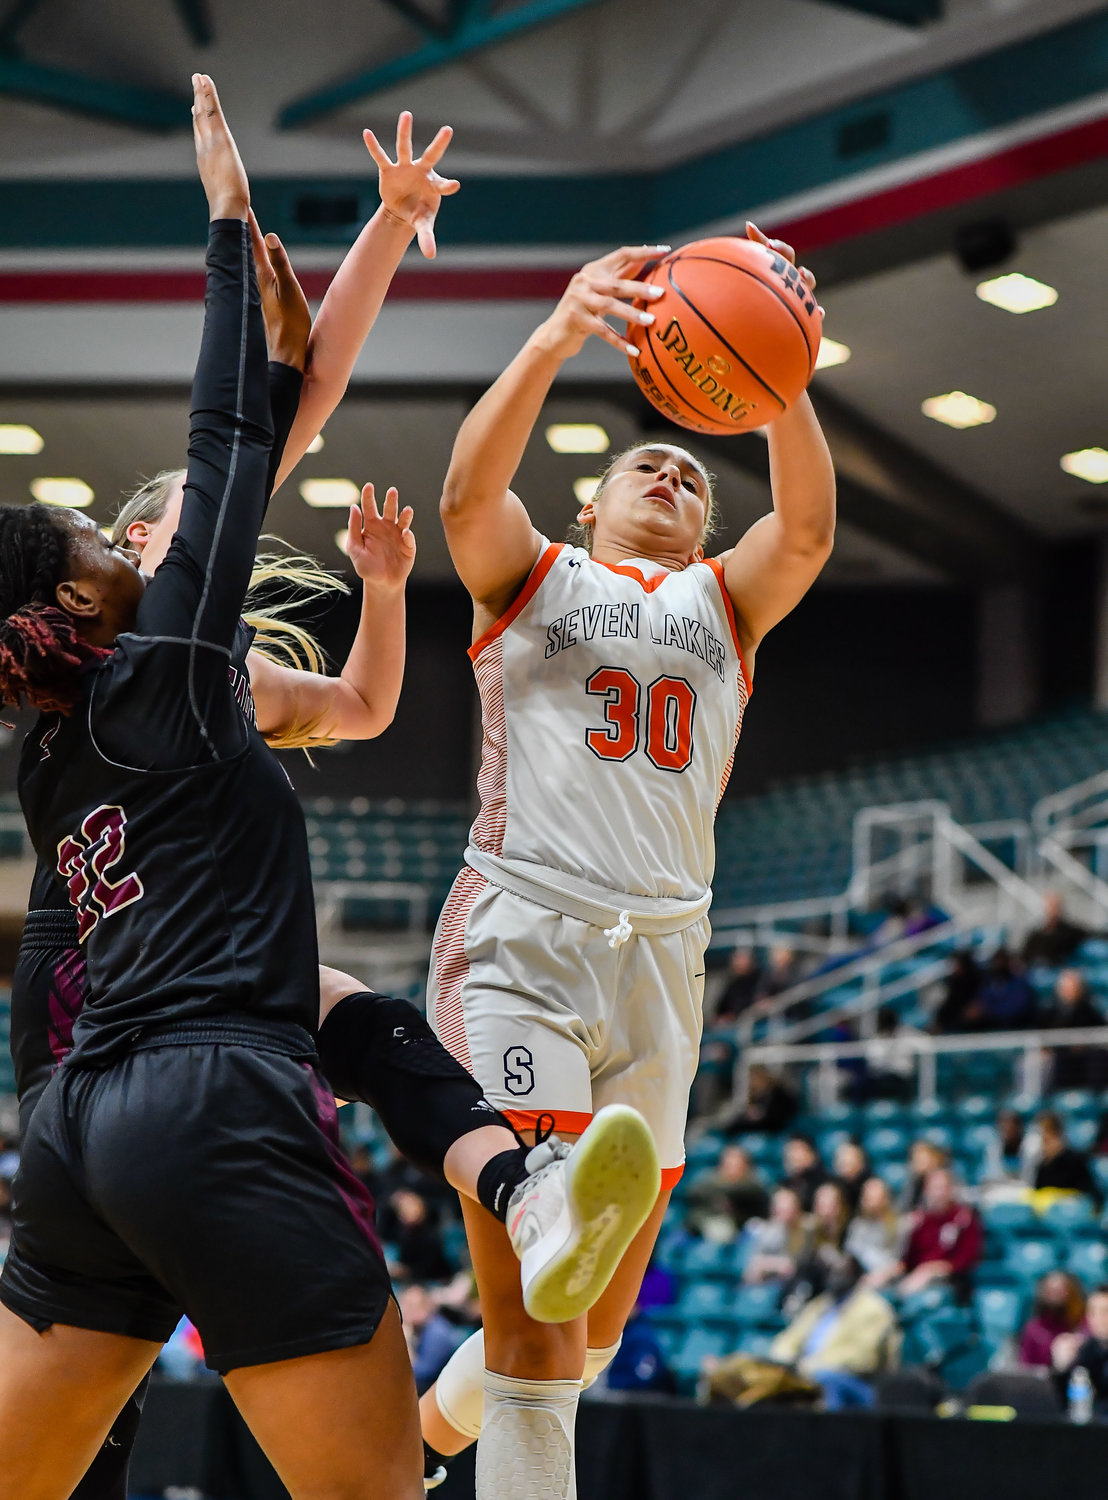 Katy Tx. Feb 25, 2022:  Seven Lakes Justice Carlton #30 pulls down the rebound during the Regional SemiFinal playoff game, Seven Lakes vs Pearland at the Merrell Center. (Photo by Mark Goodman / Katy Times)